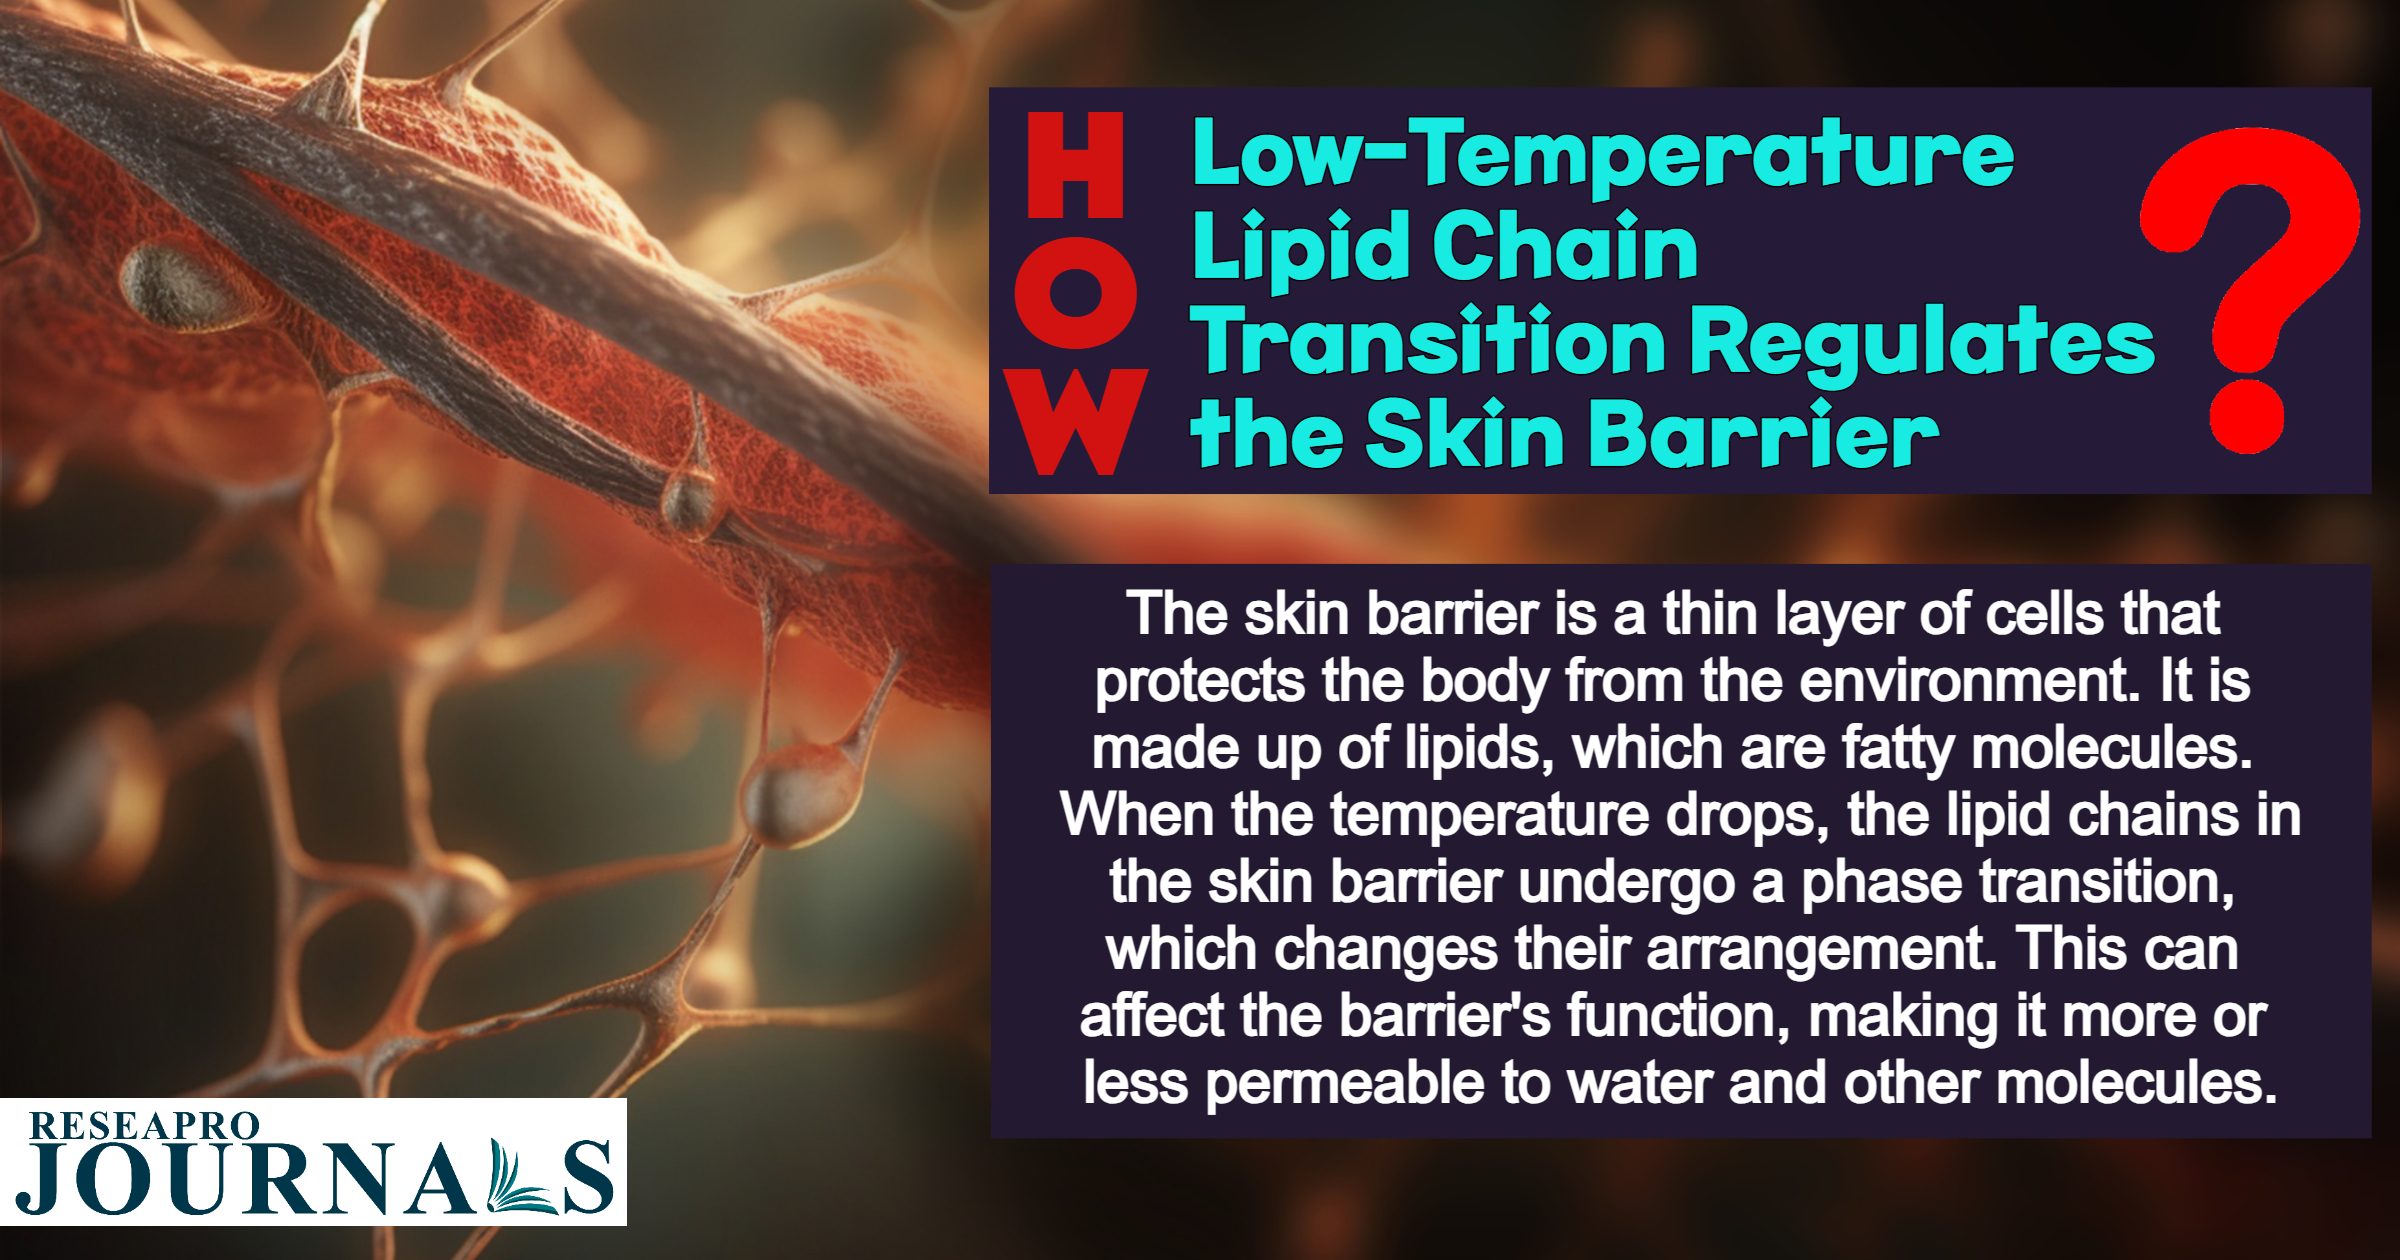 How low temperature lipid chain transition regulates the skin barrier?